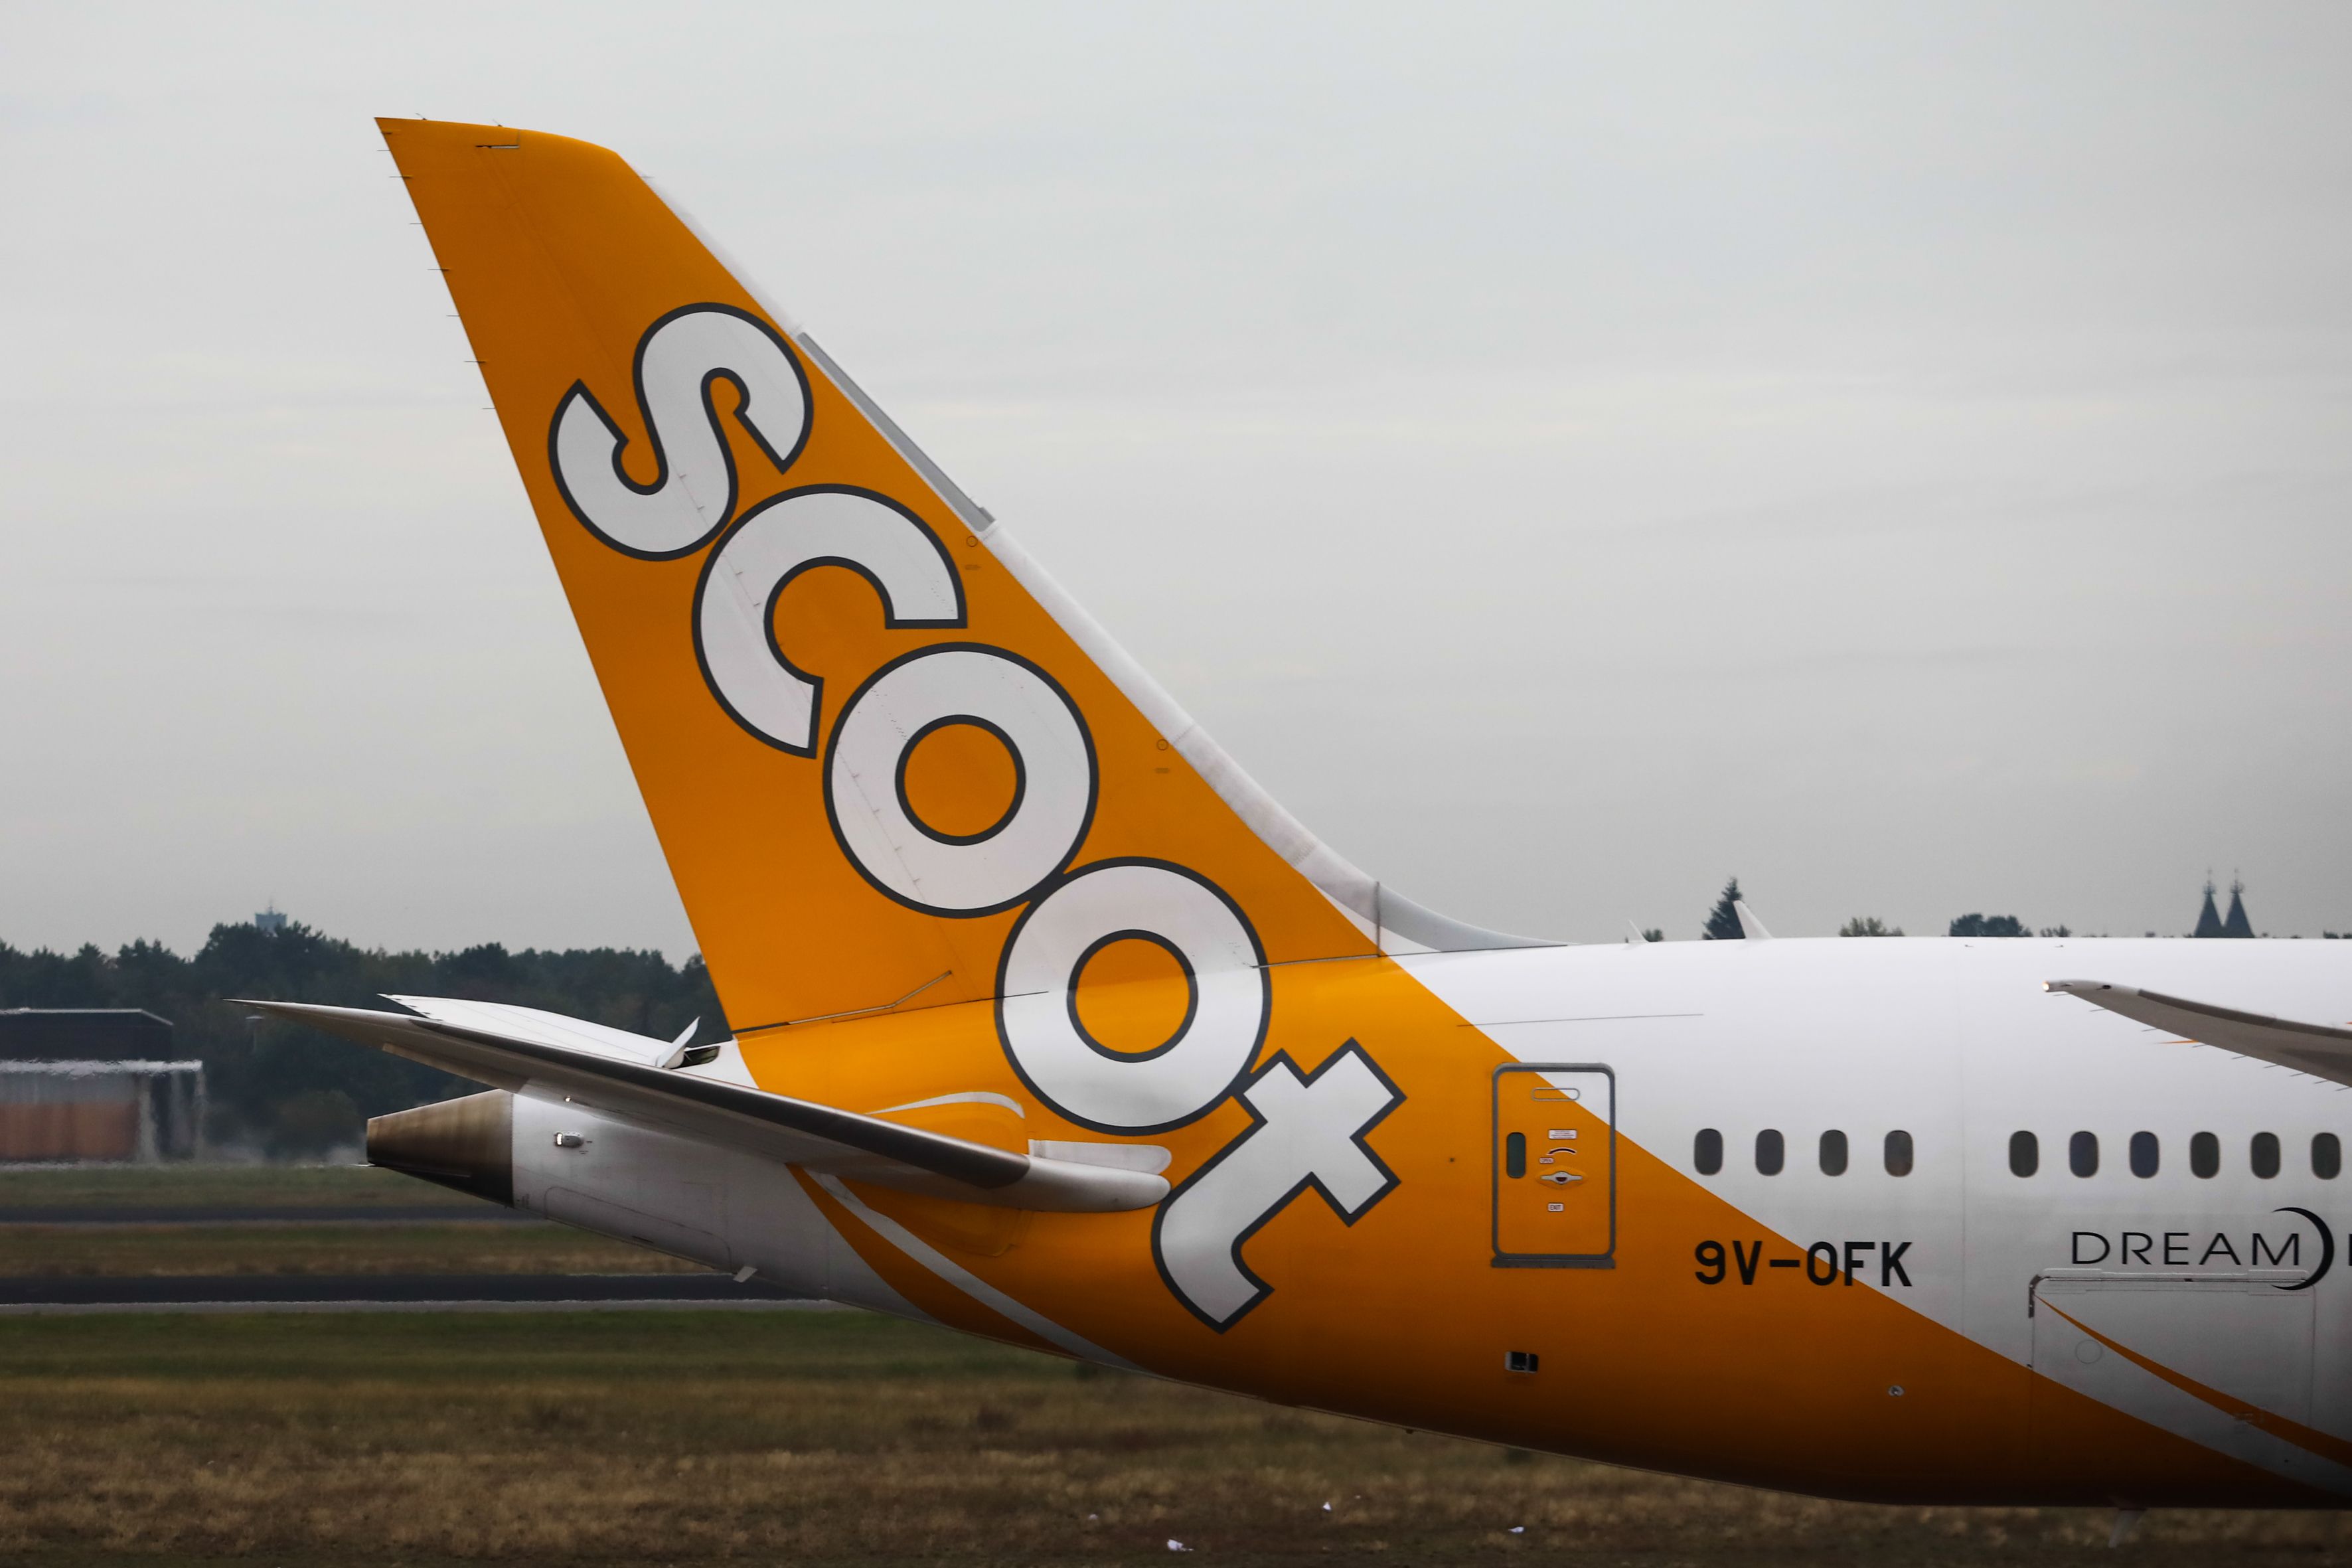 https://www.gettyimages.com.au/detail/news-photo/scoot-boeing-787-8-dreamliner-plane-is-seen-at-tegel-news-photo/1171578398?adppopup=true